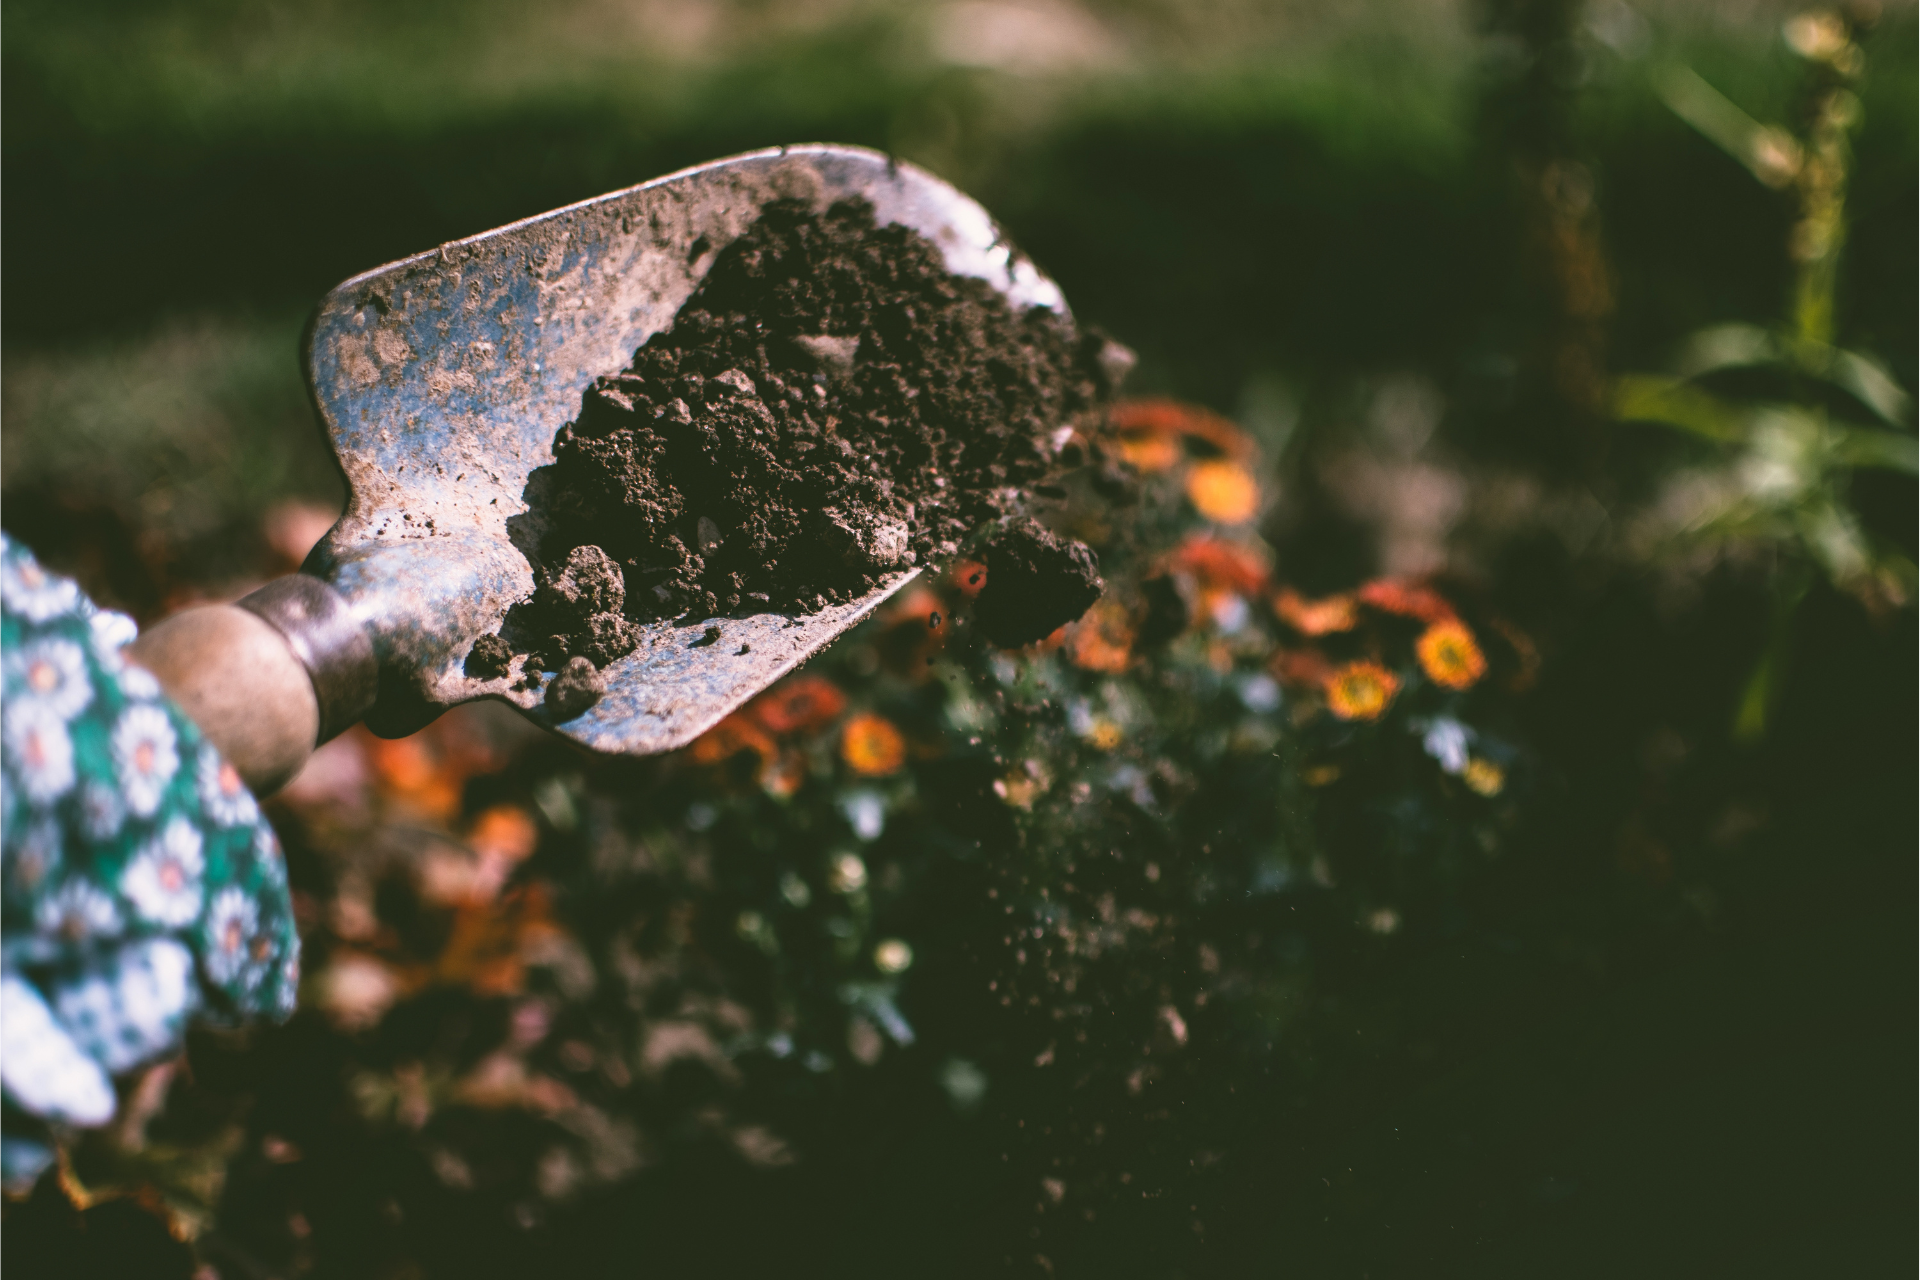 a person is holding a shovel filled with dirt in a garden .